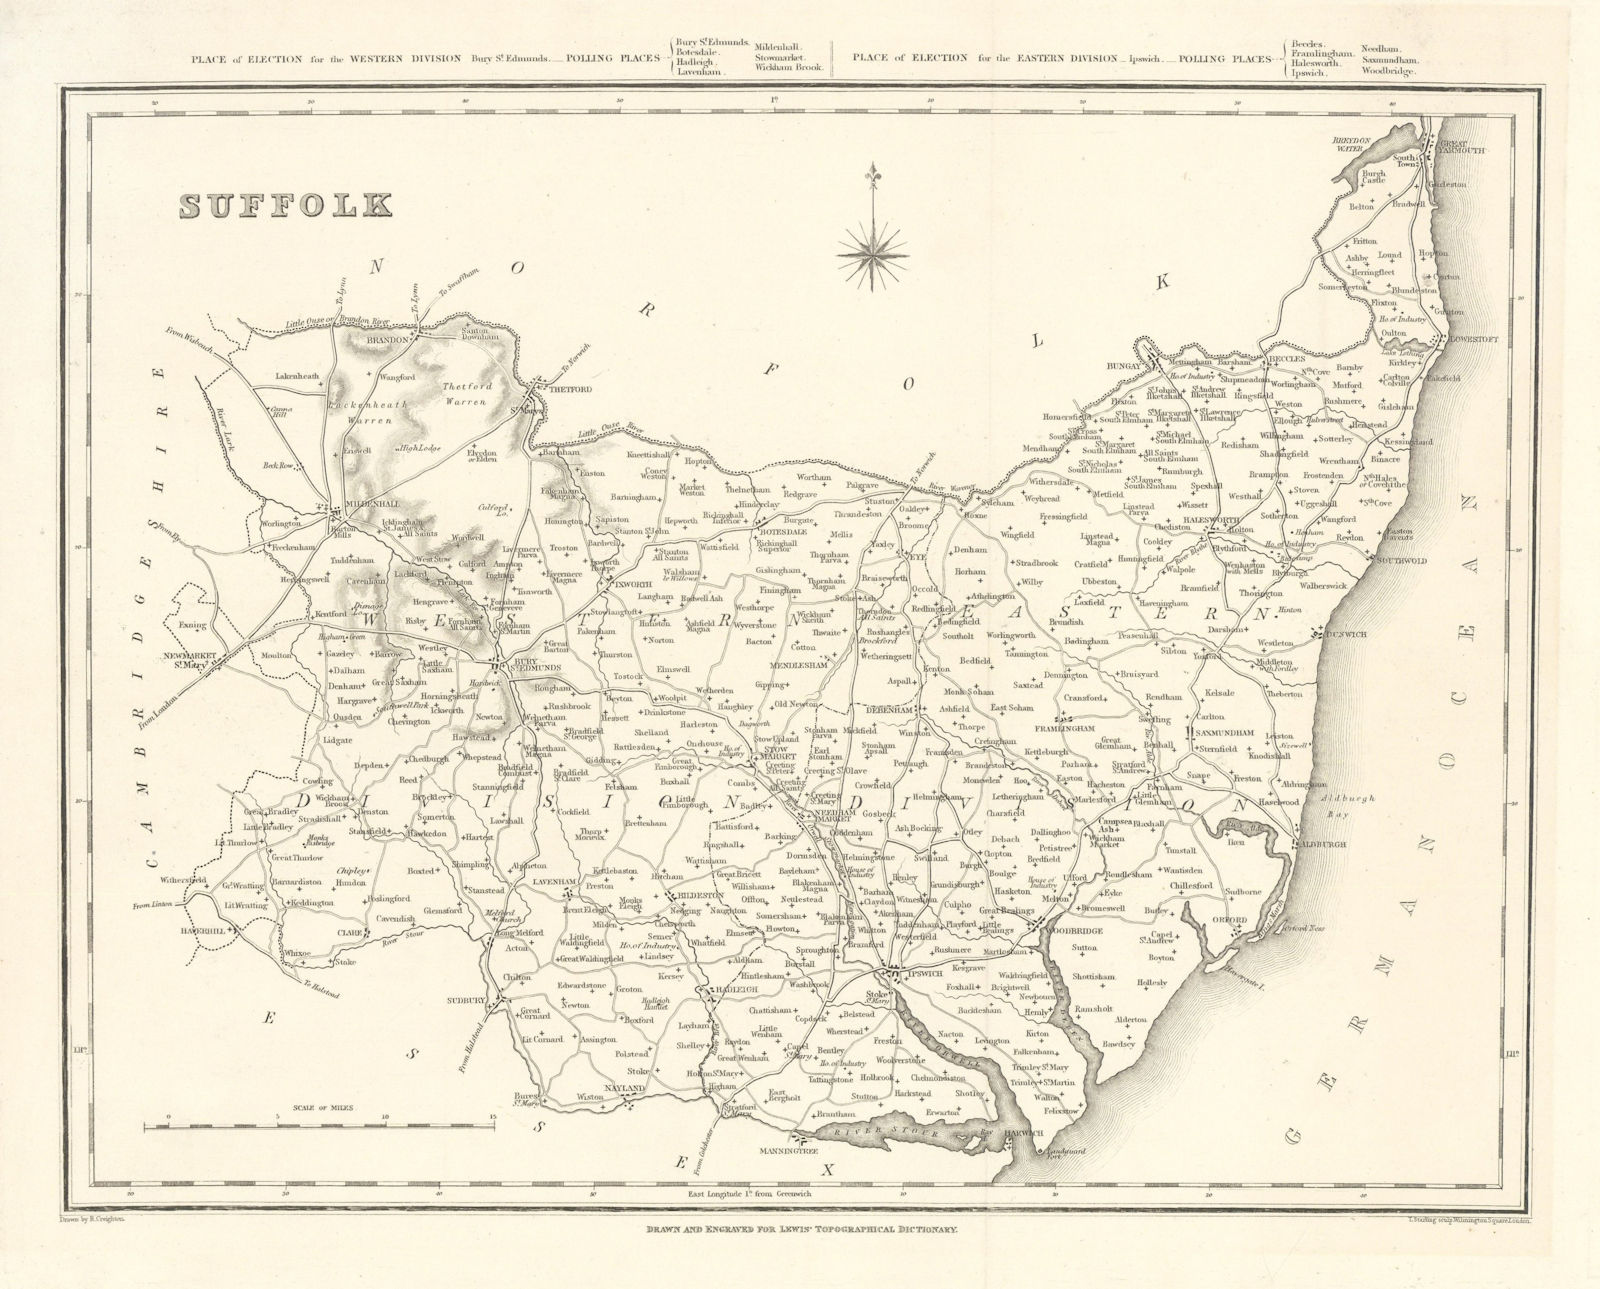 Associate Product Antique county map of SUFFOLK by Starling & Creighton for Lewis c1840 old